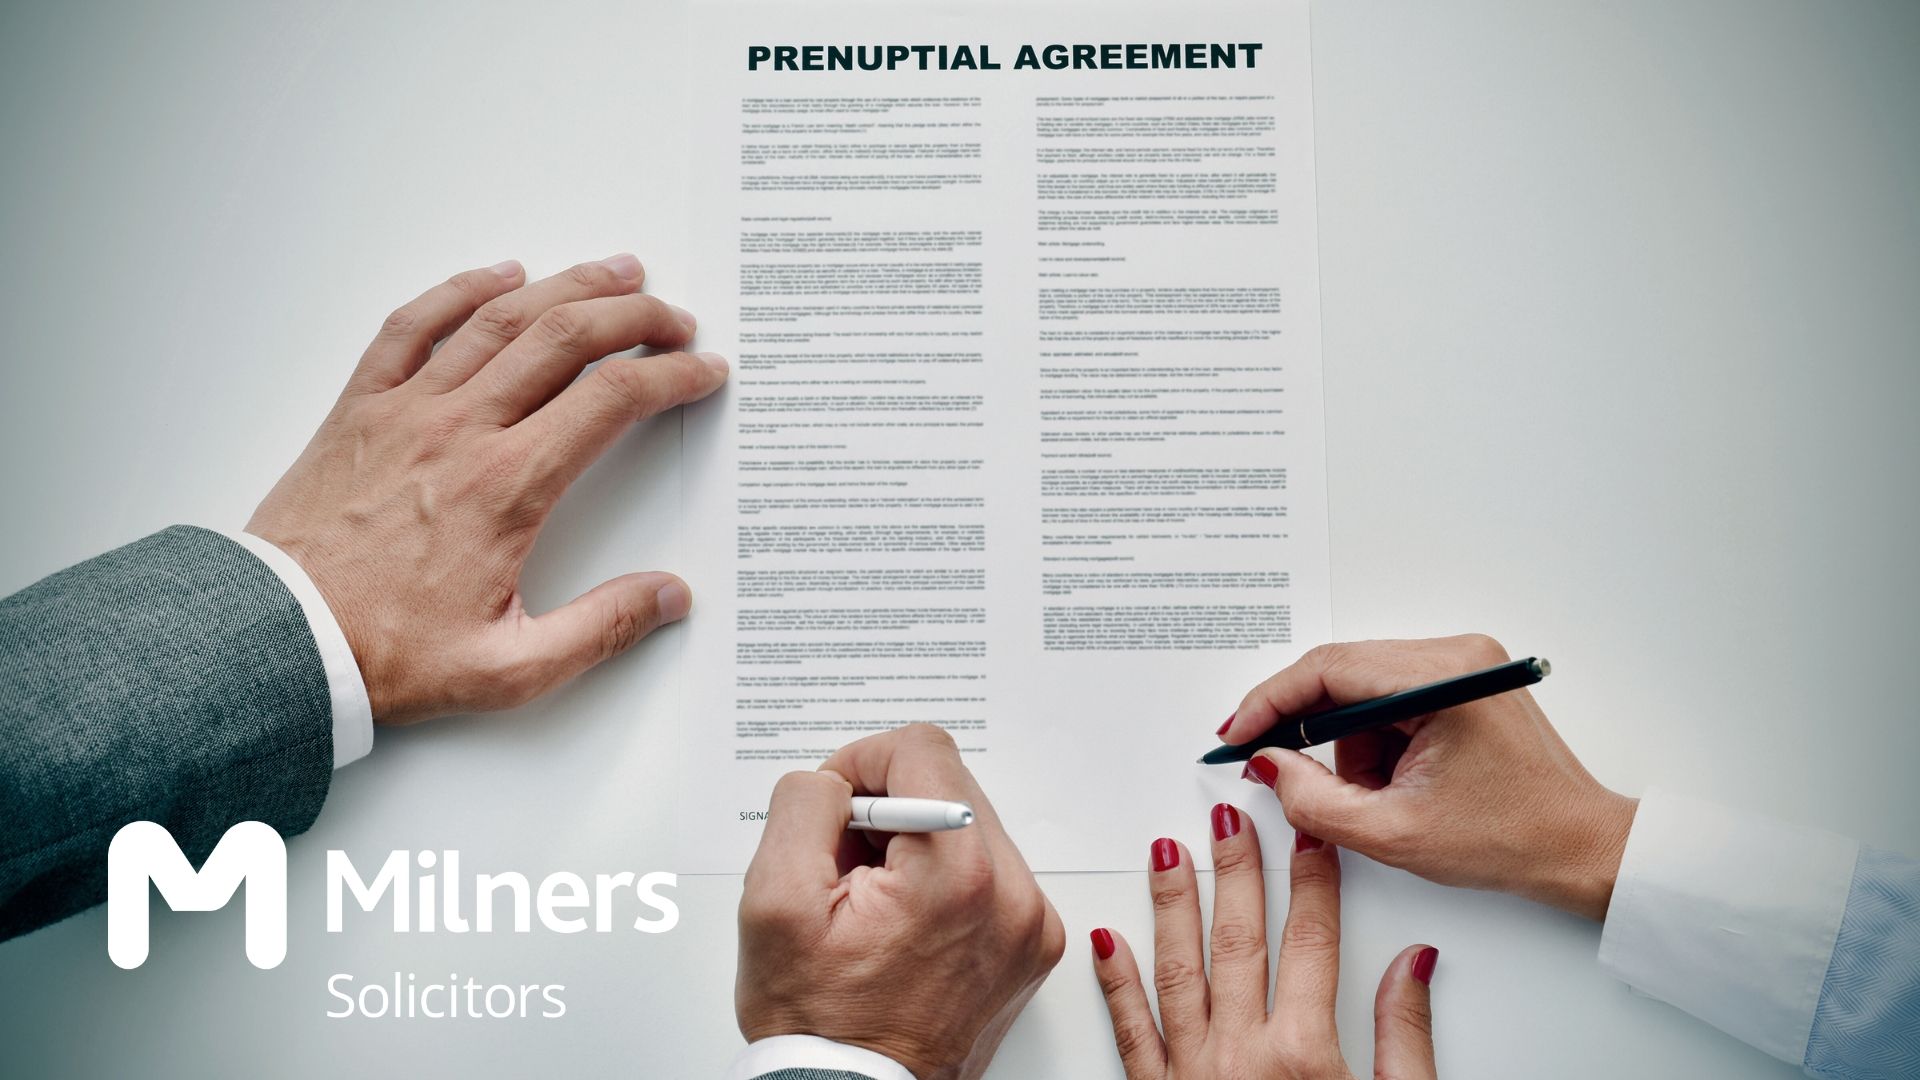 Pre-nuptial agreements are becoming more popular in the UK. Are you considering entering into one? Learn 3 key facts you should know before signing.
